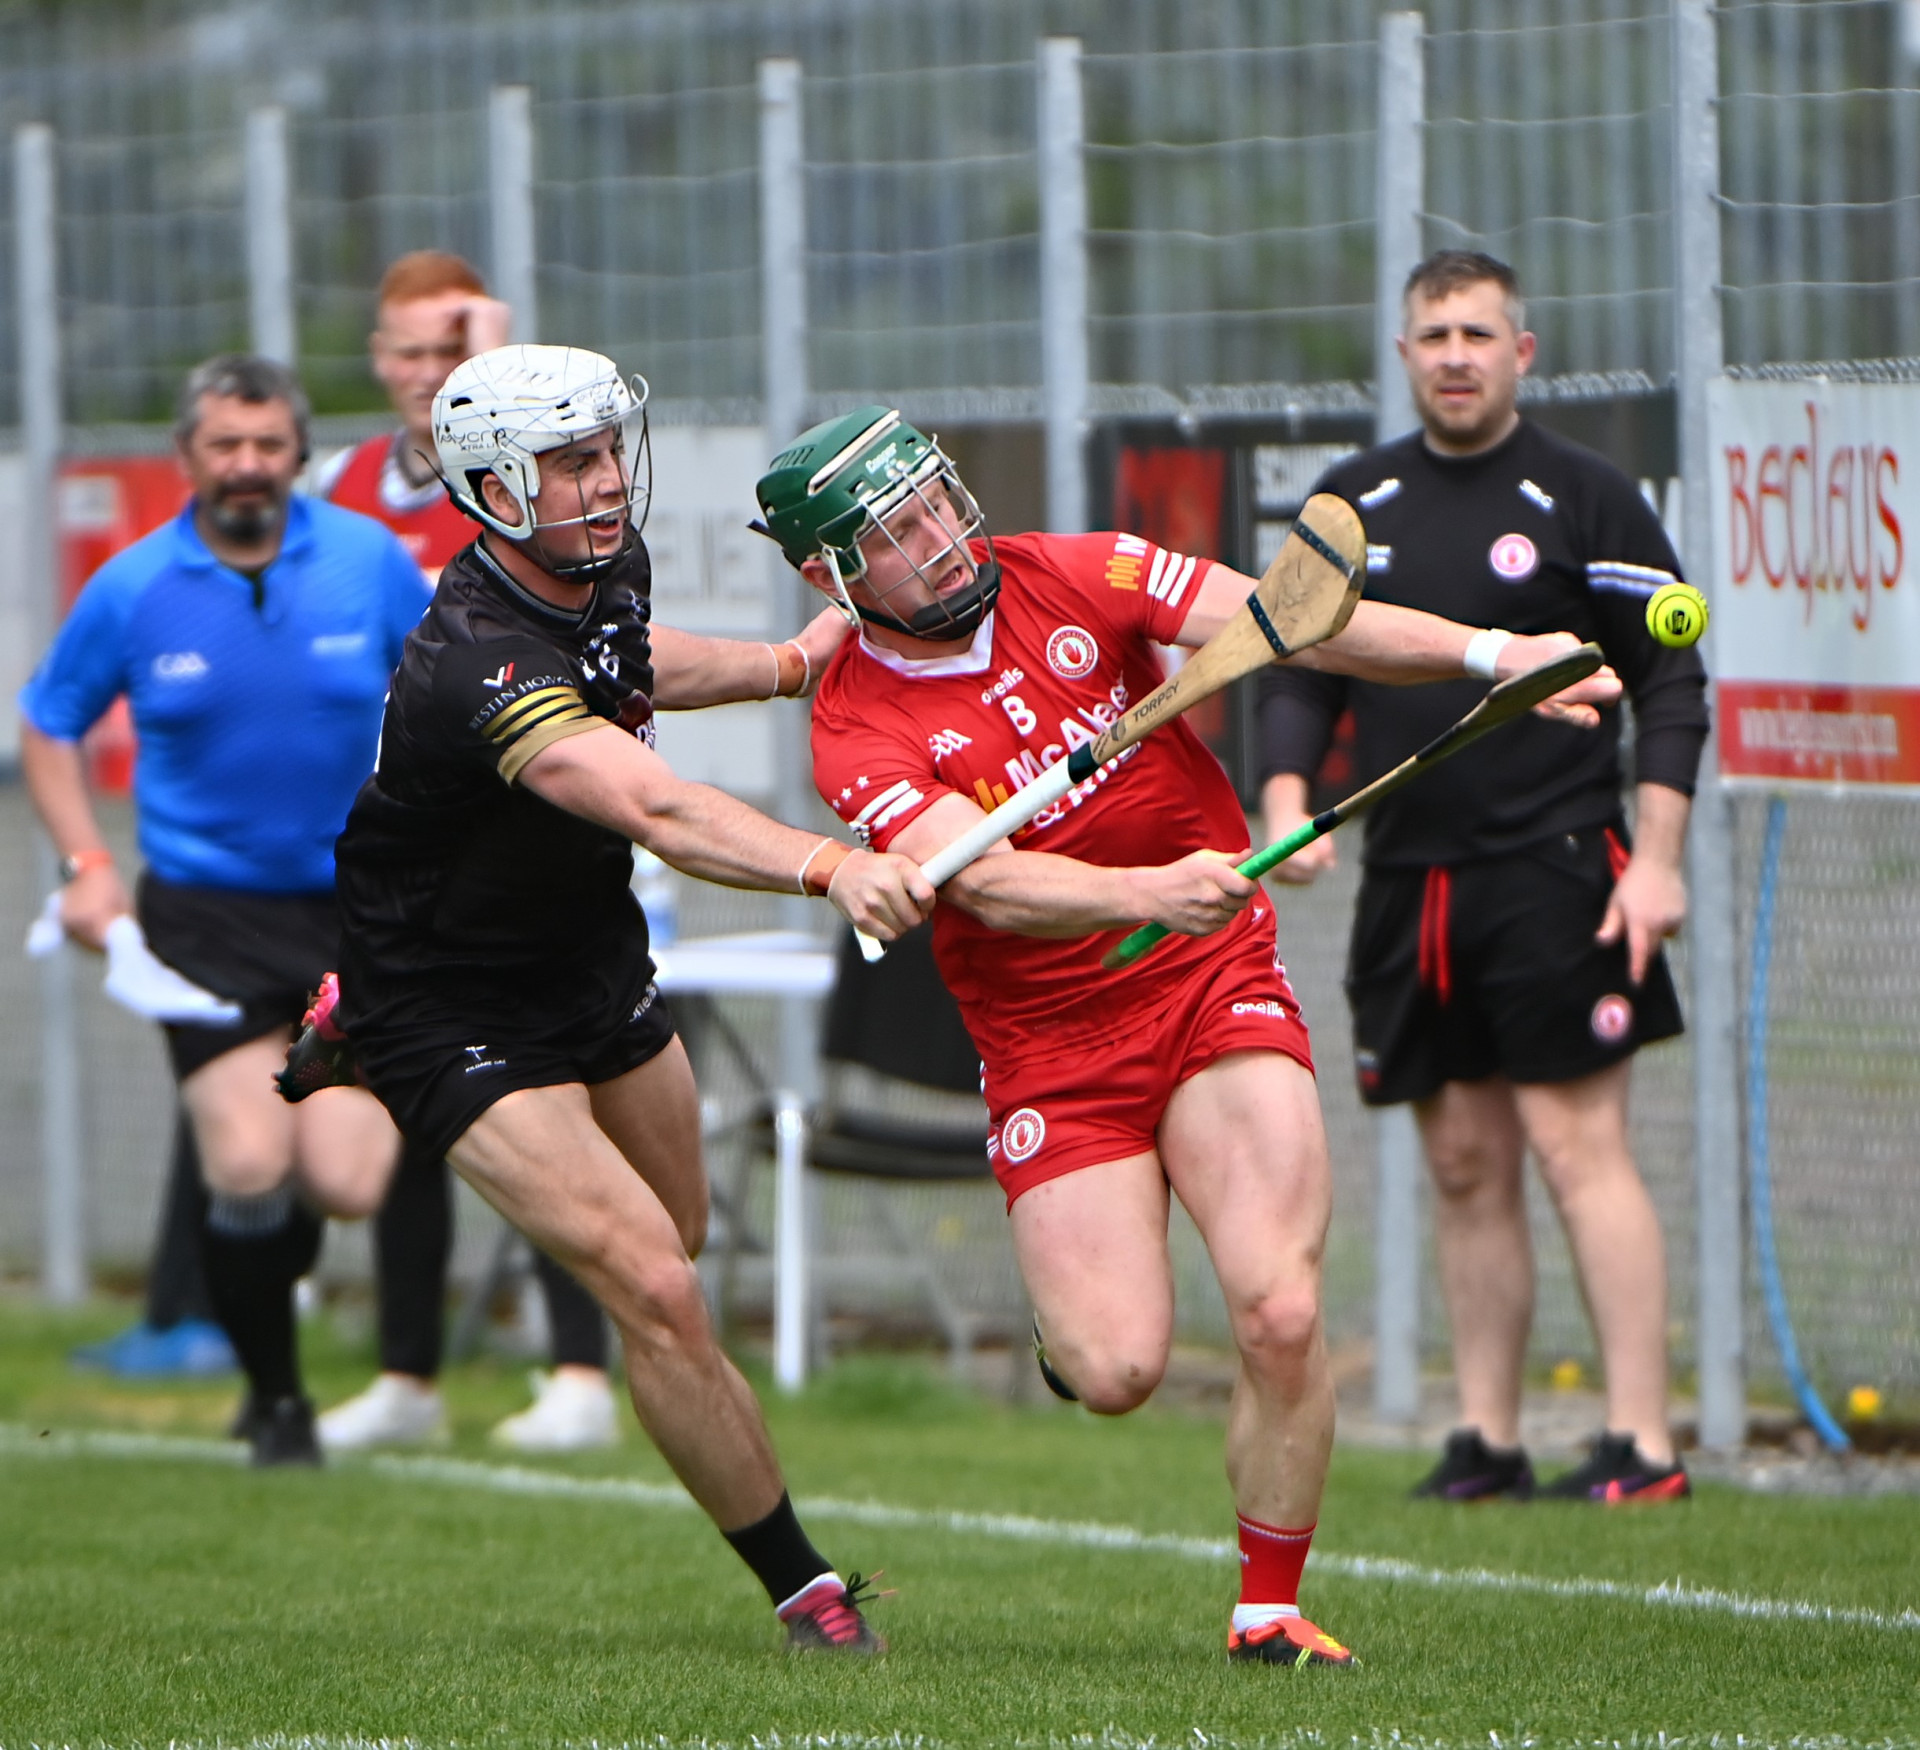 Survival at stake for County hurlers